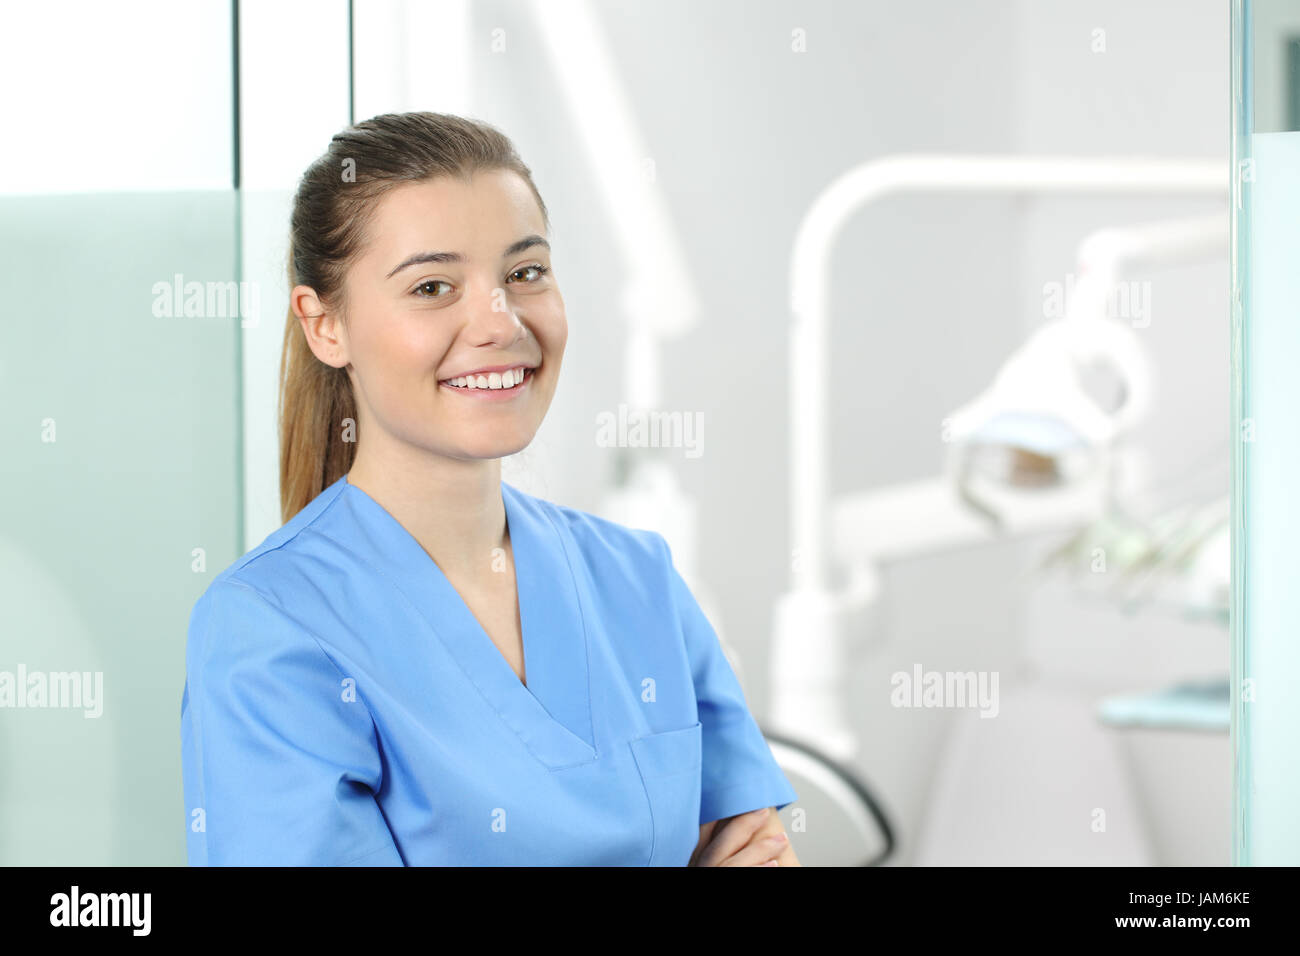 Portrait of a young female doctor wearing a blue coat posing in a dentist office with medical equipment in the background Stock Photo